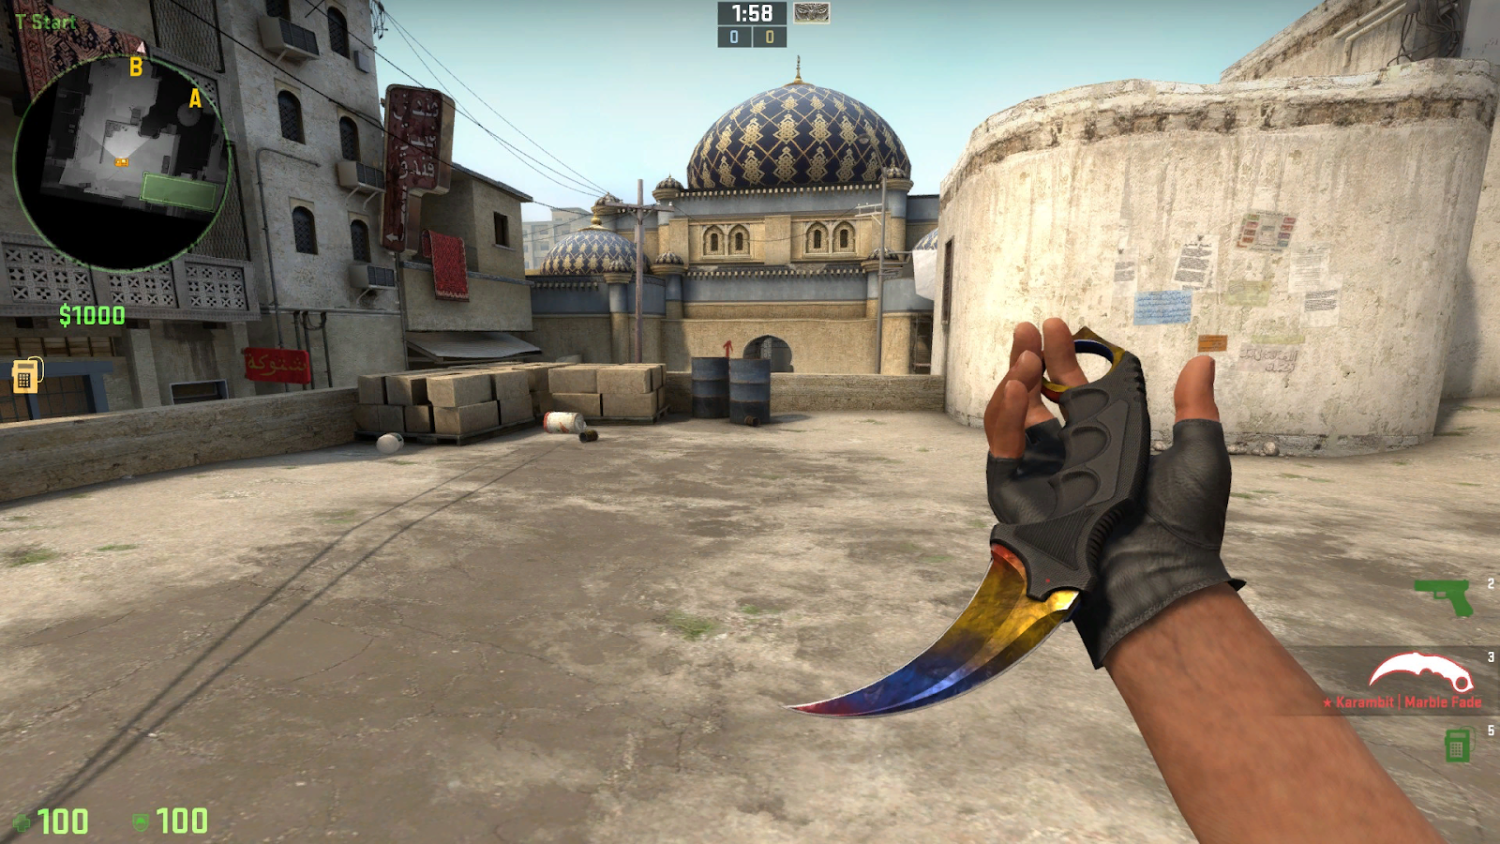 What CS:GO Cases Have Karambits? Best Case For Karambit 2